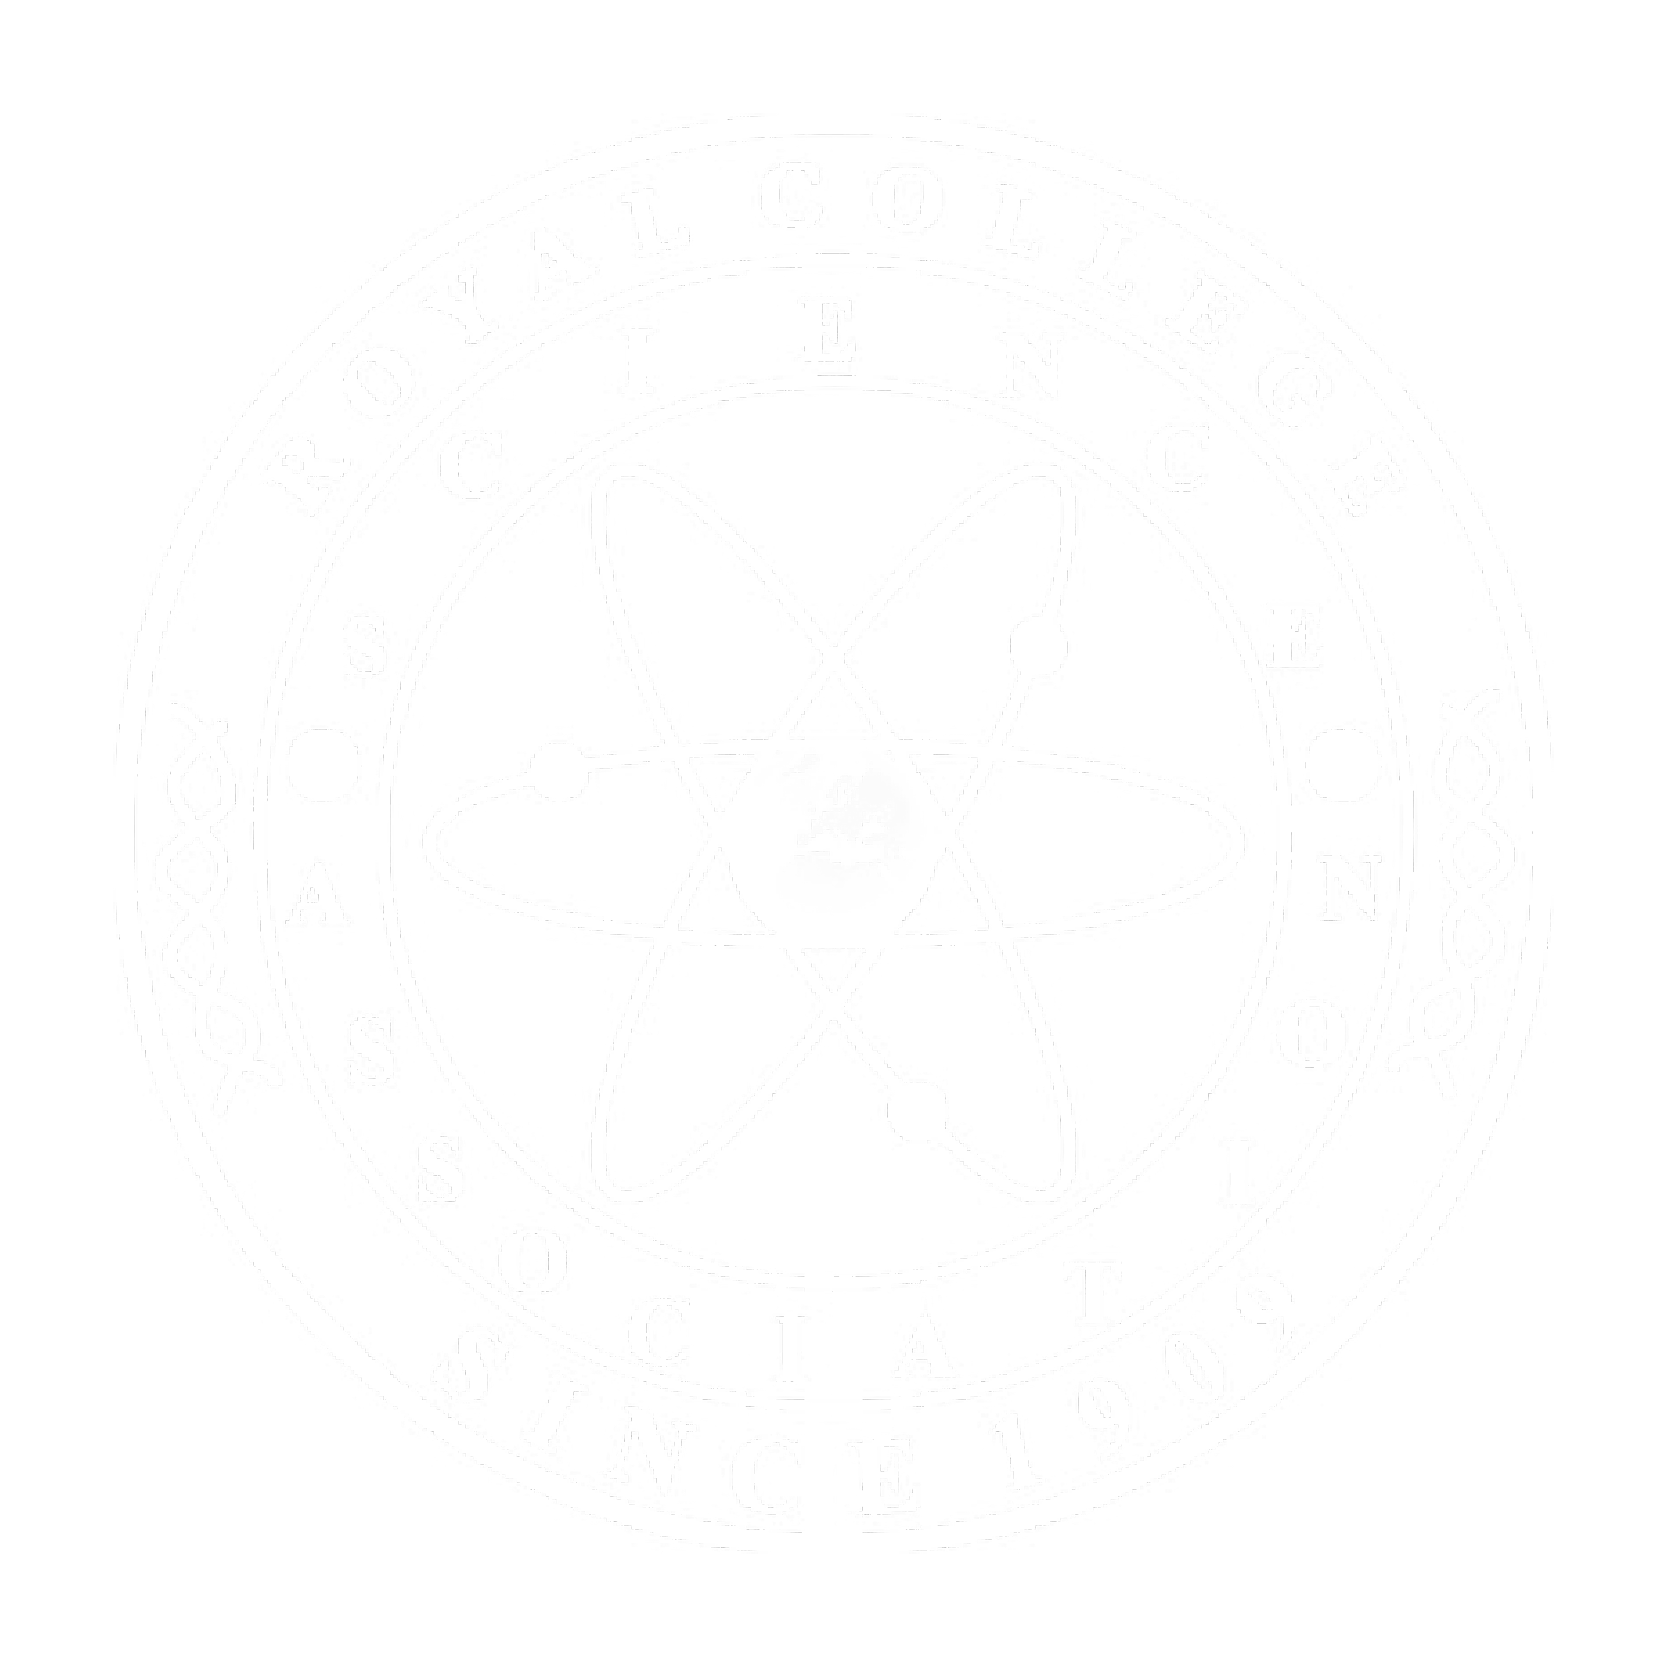 Science - The Royal College